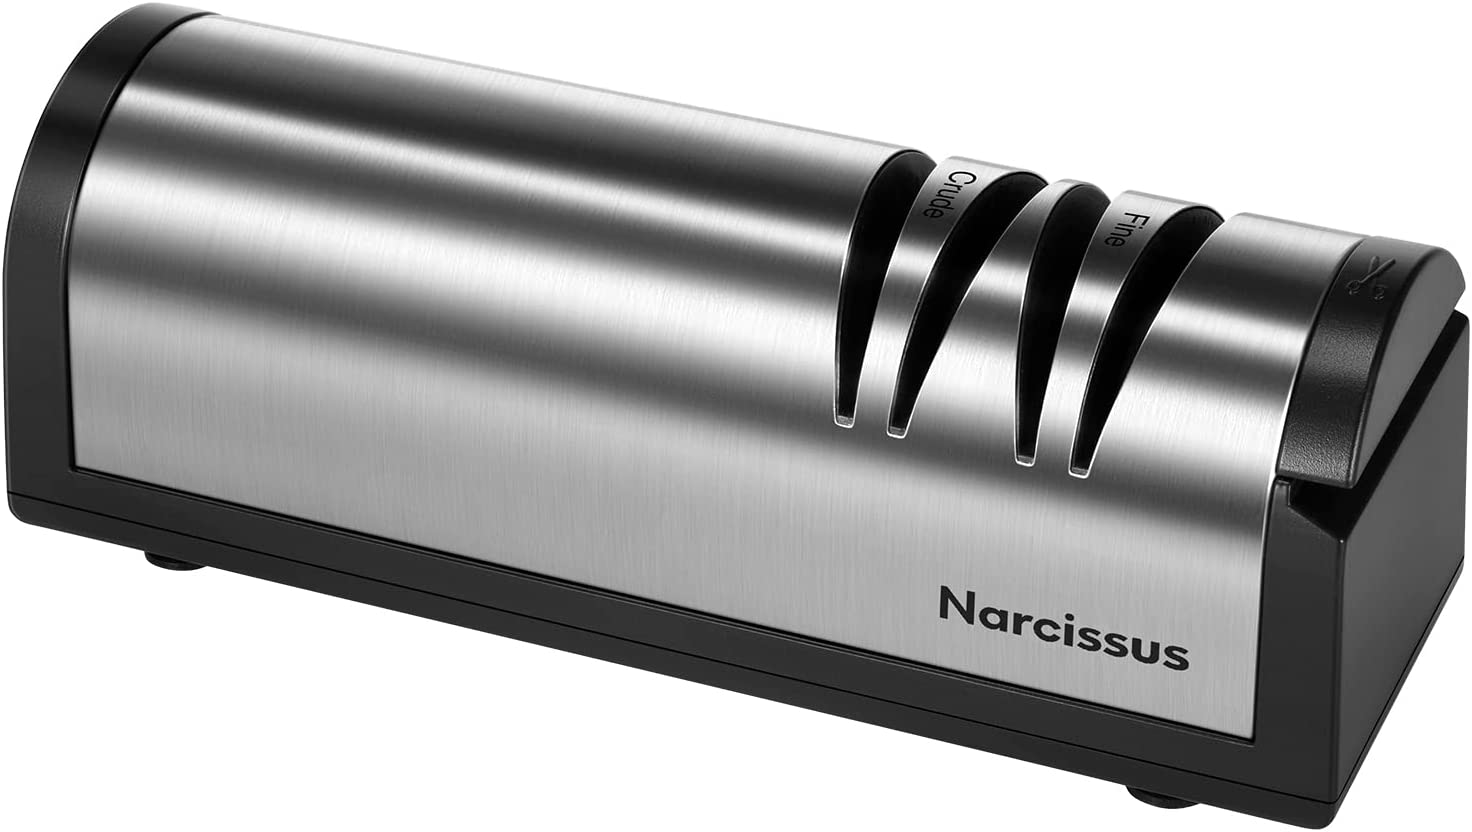 Narcissus Knife Sharpener, Professional 2 Stage Electric Knife Sharpener for Quick Sharpening & Polishing, with Scissors Sharpener and Metal Dust Collection Box, Stainless Steel, Silver